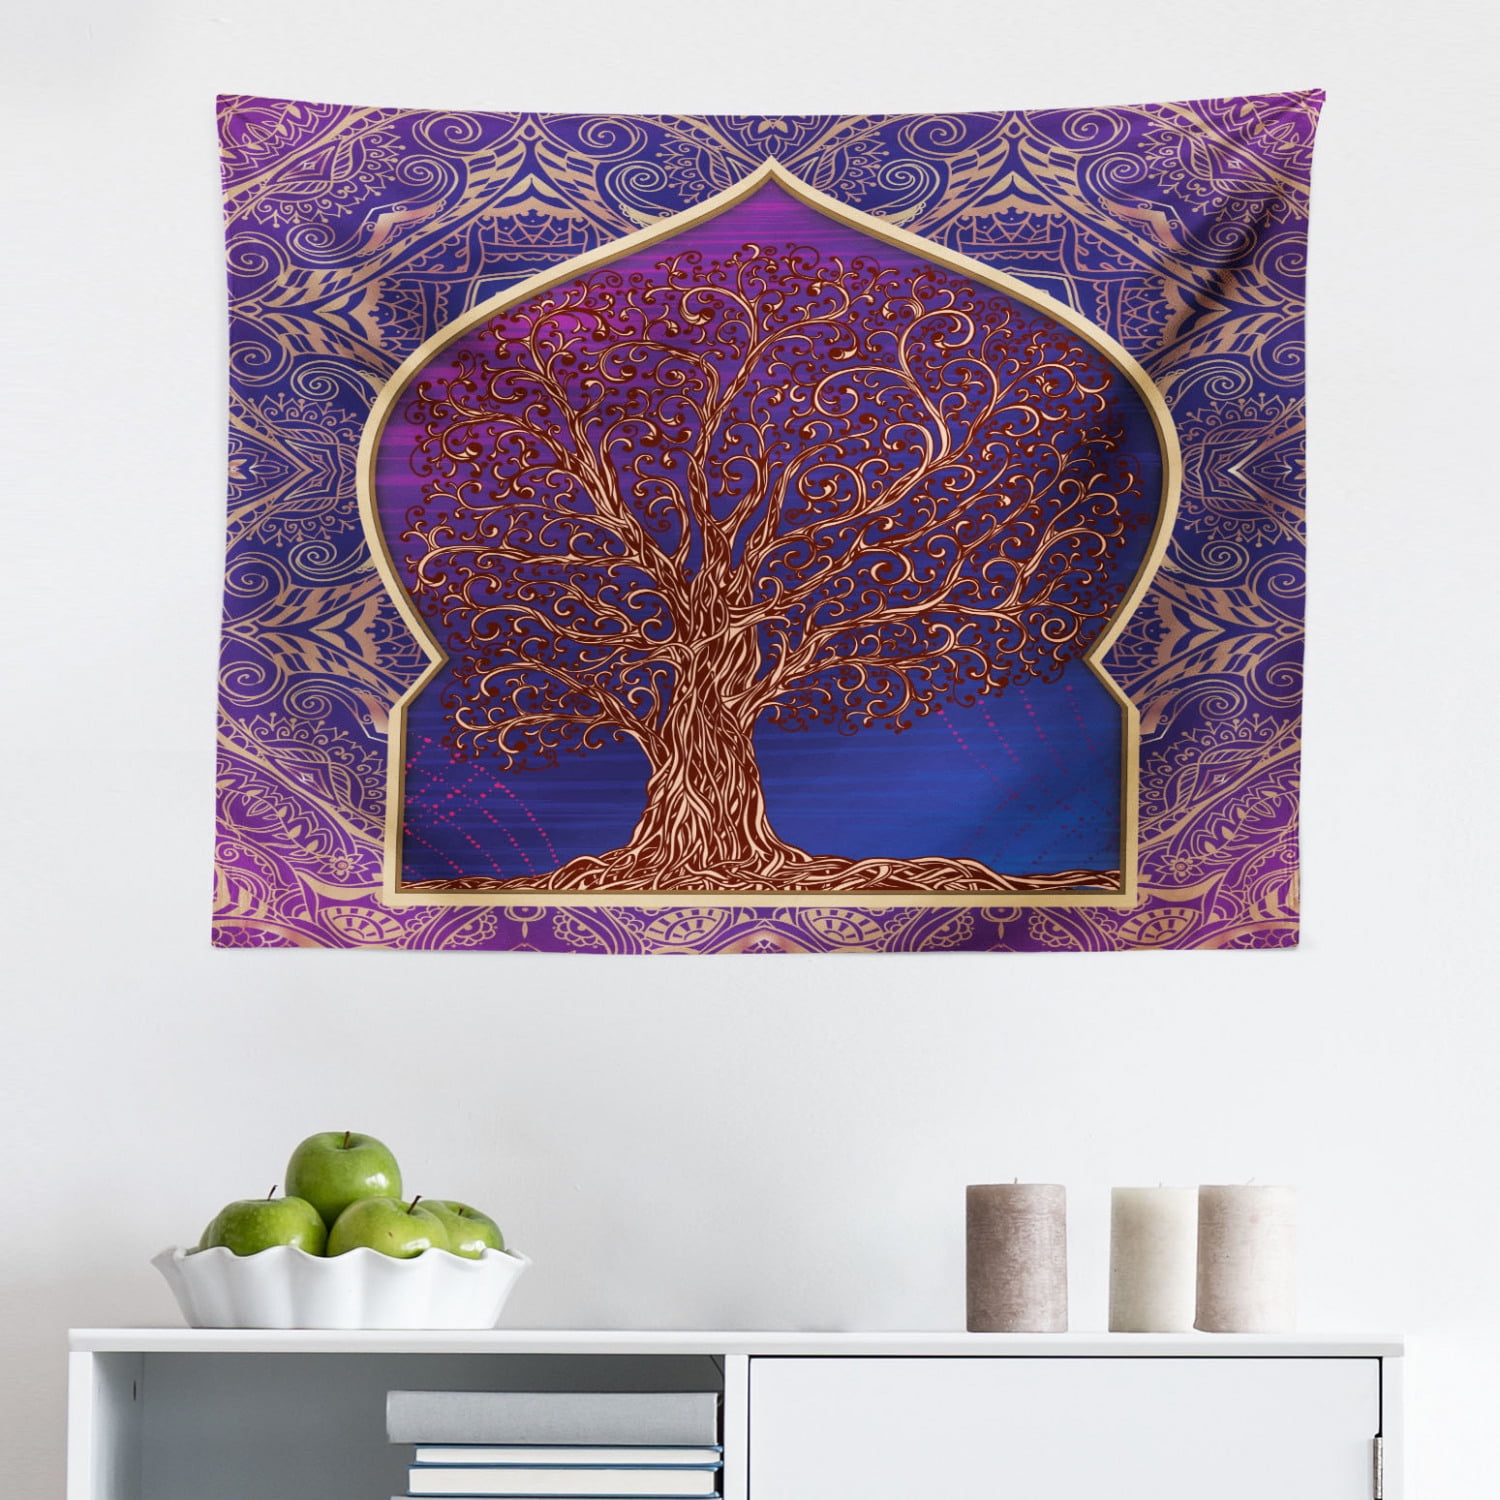 Vintage Tree of Life with Sun and Moon Elf on Branches Enchanted Wall Hanging for Bedroom Living Room Dorm Ambesonne Ethnic Tapestry 40 W X 60 L Inches Dark Orange Pale Mauve Taupe tap_22427_40x60